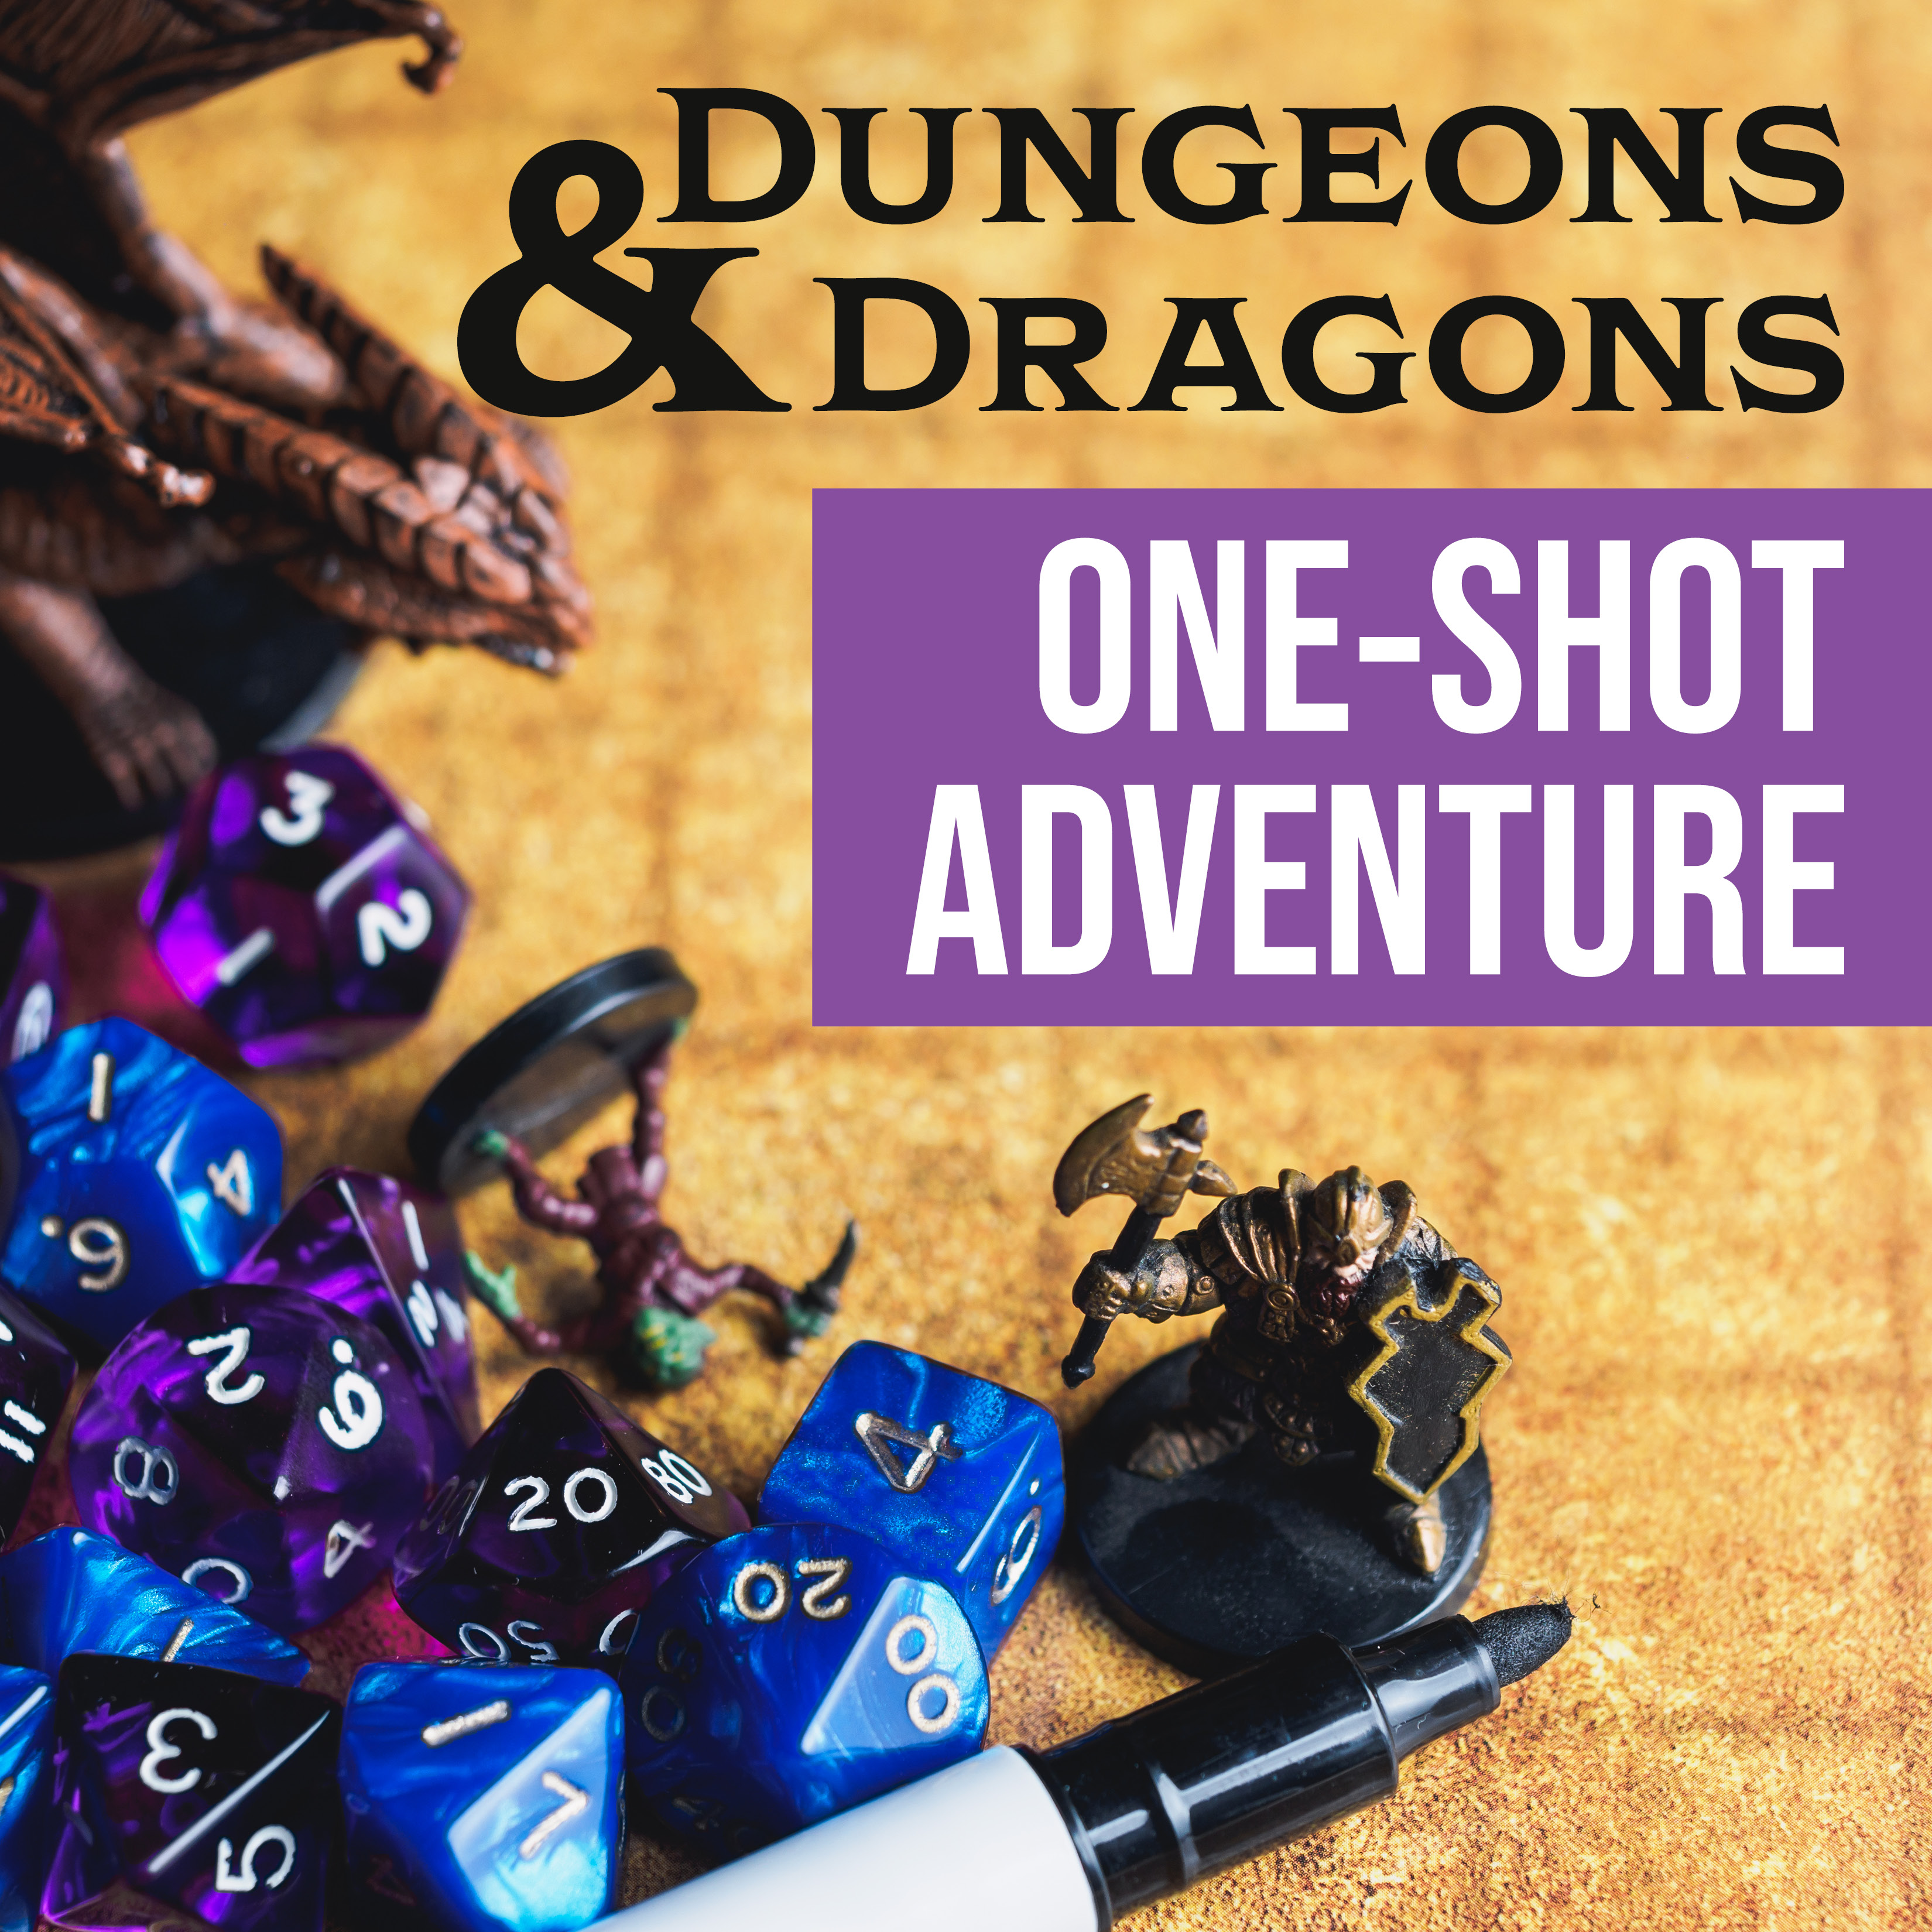 Dungeons and Dragons One-Shot Adventure